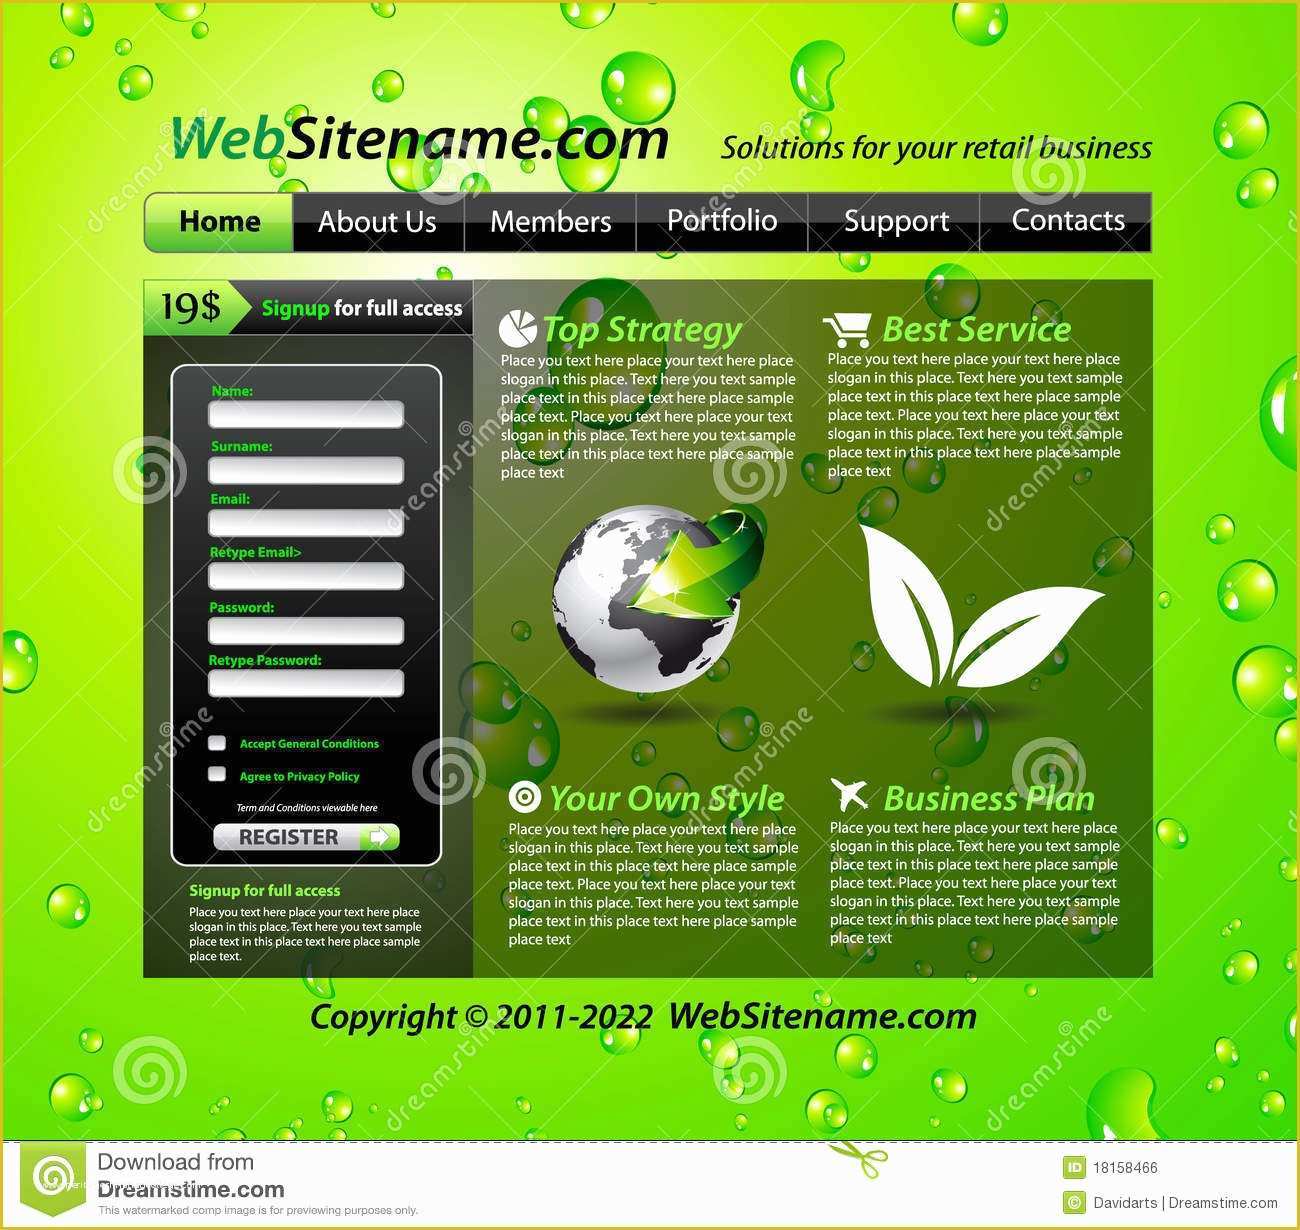 Copyright Free Website Templates Of Green Eco themed Website Template Royalty Free Stock Image